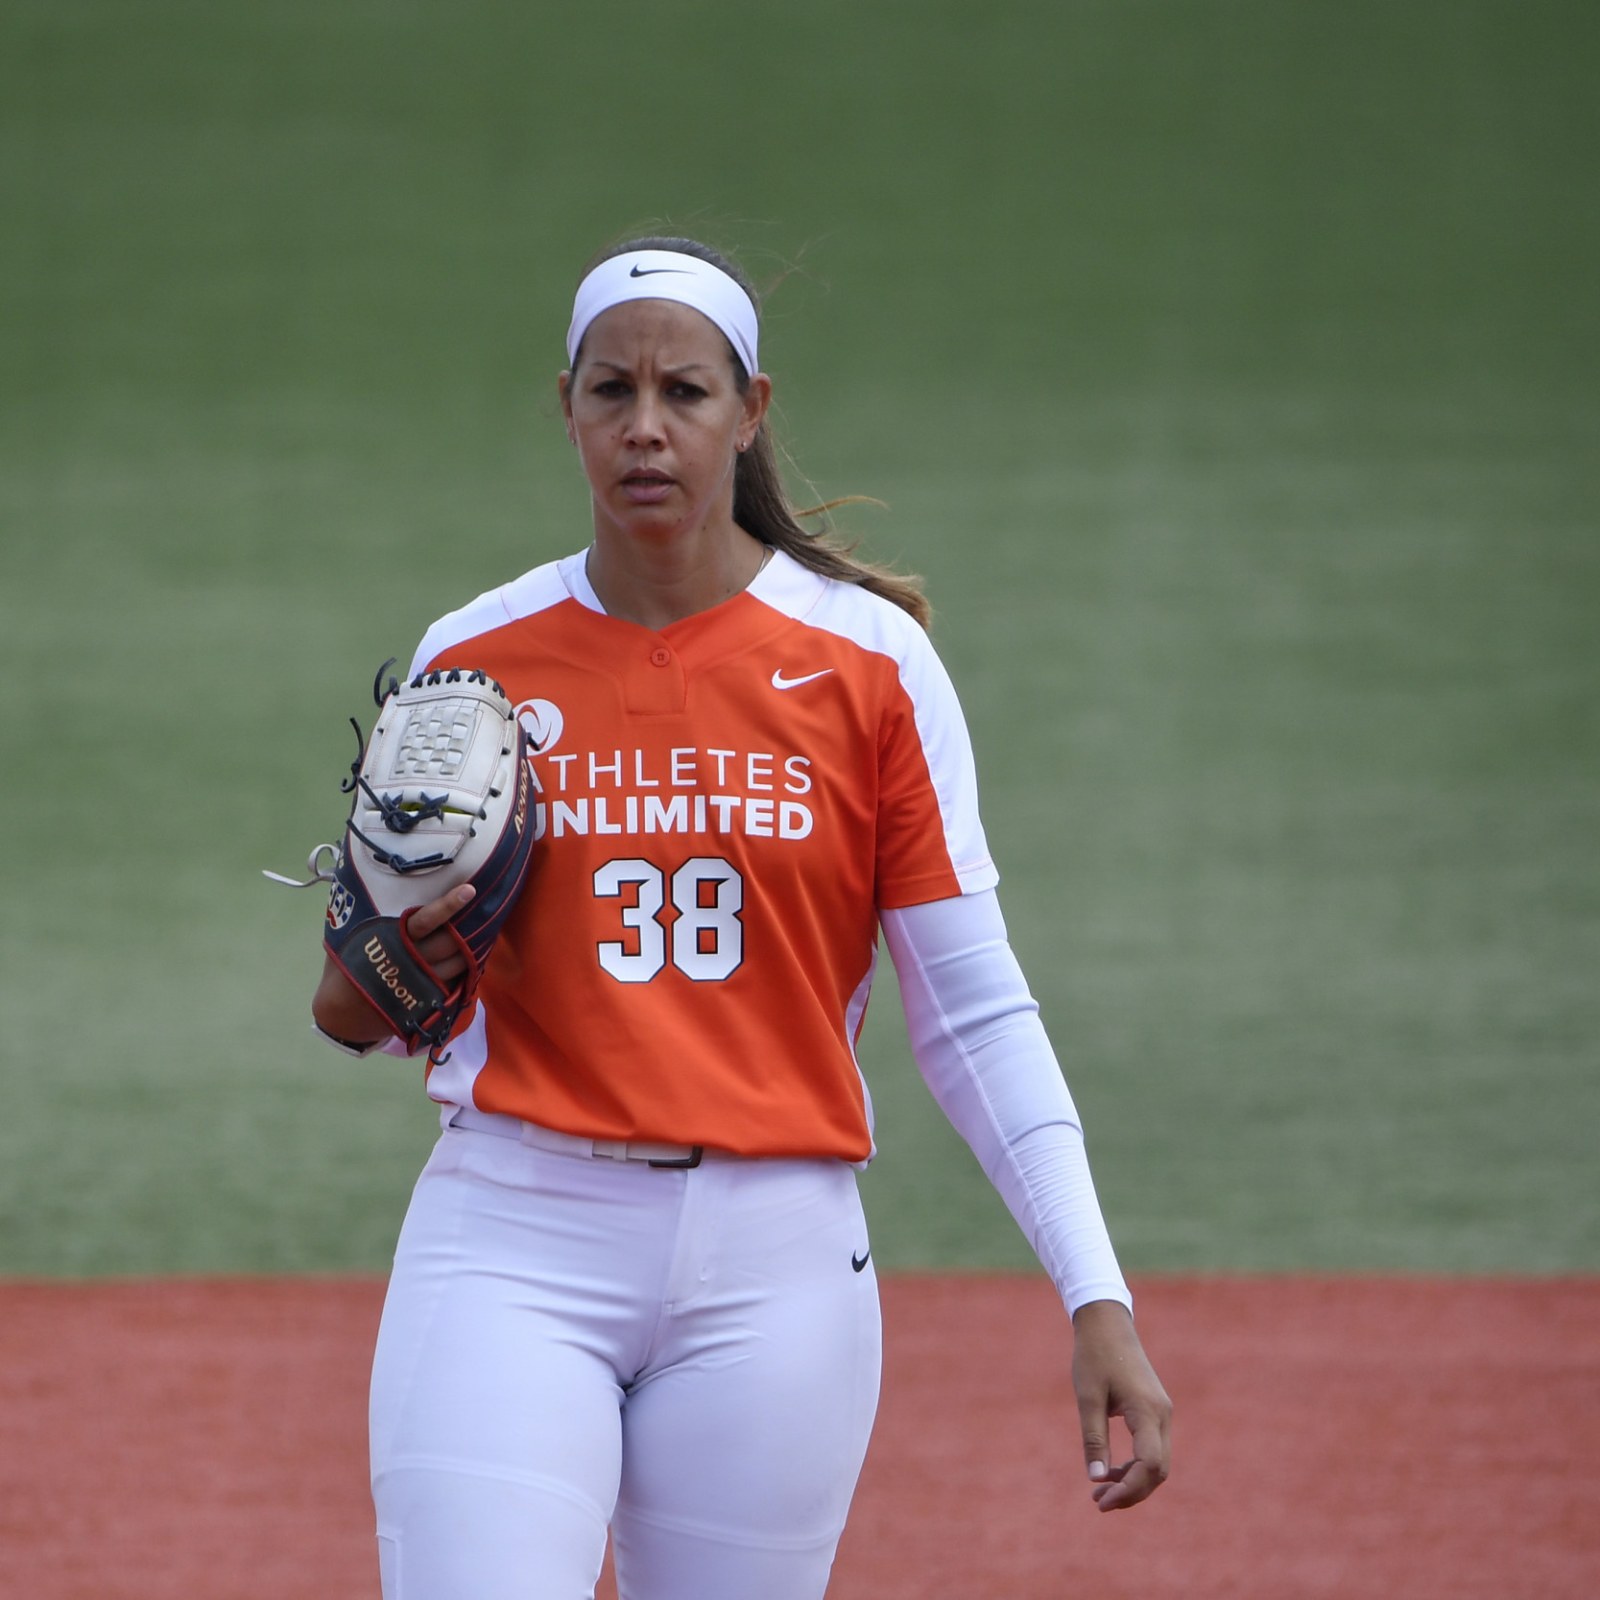 Cat Osterman Sporting Career Husband And Family Of The Olympic Softball Pitcher